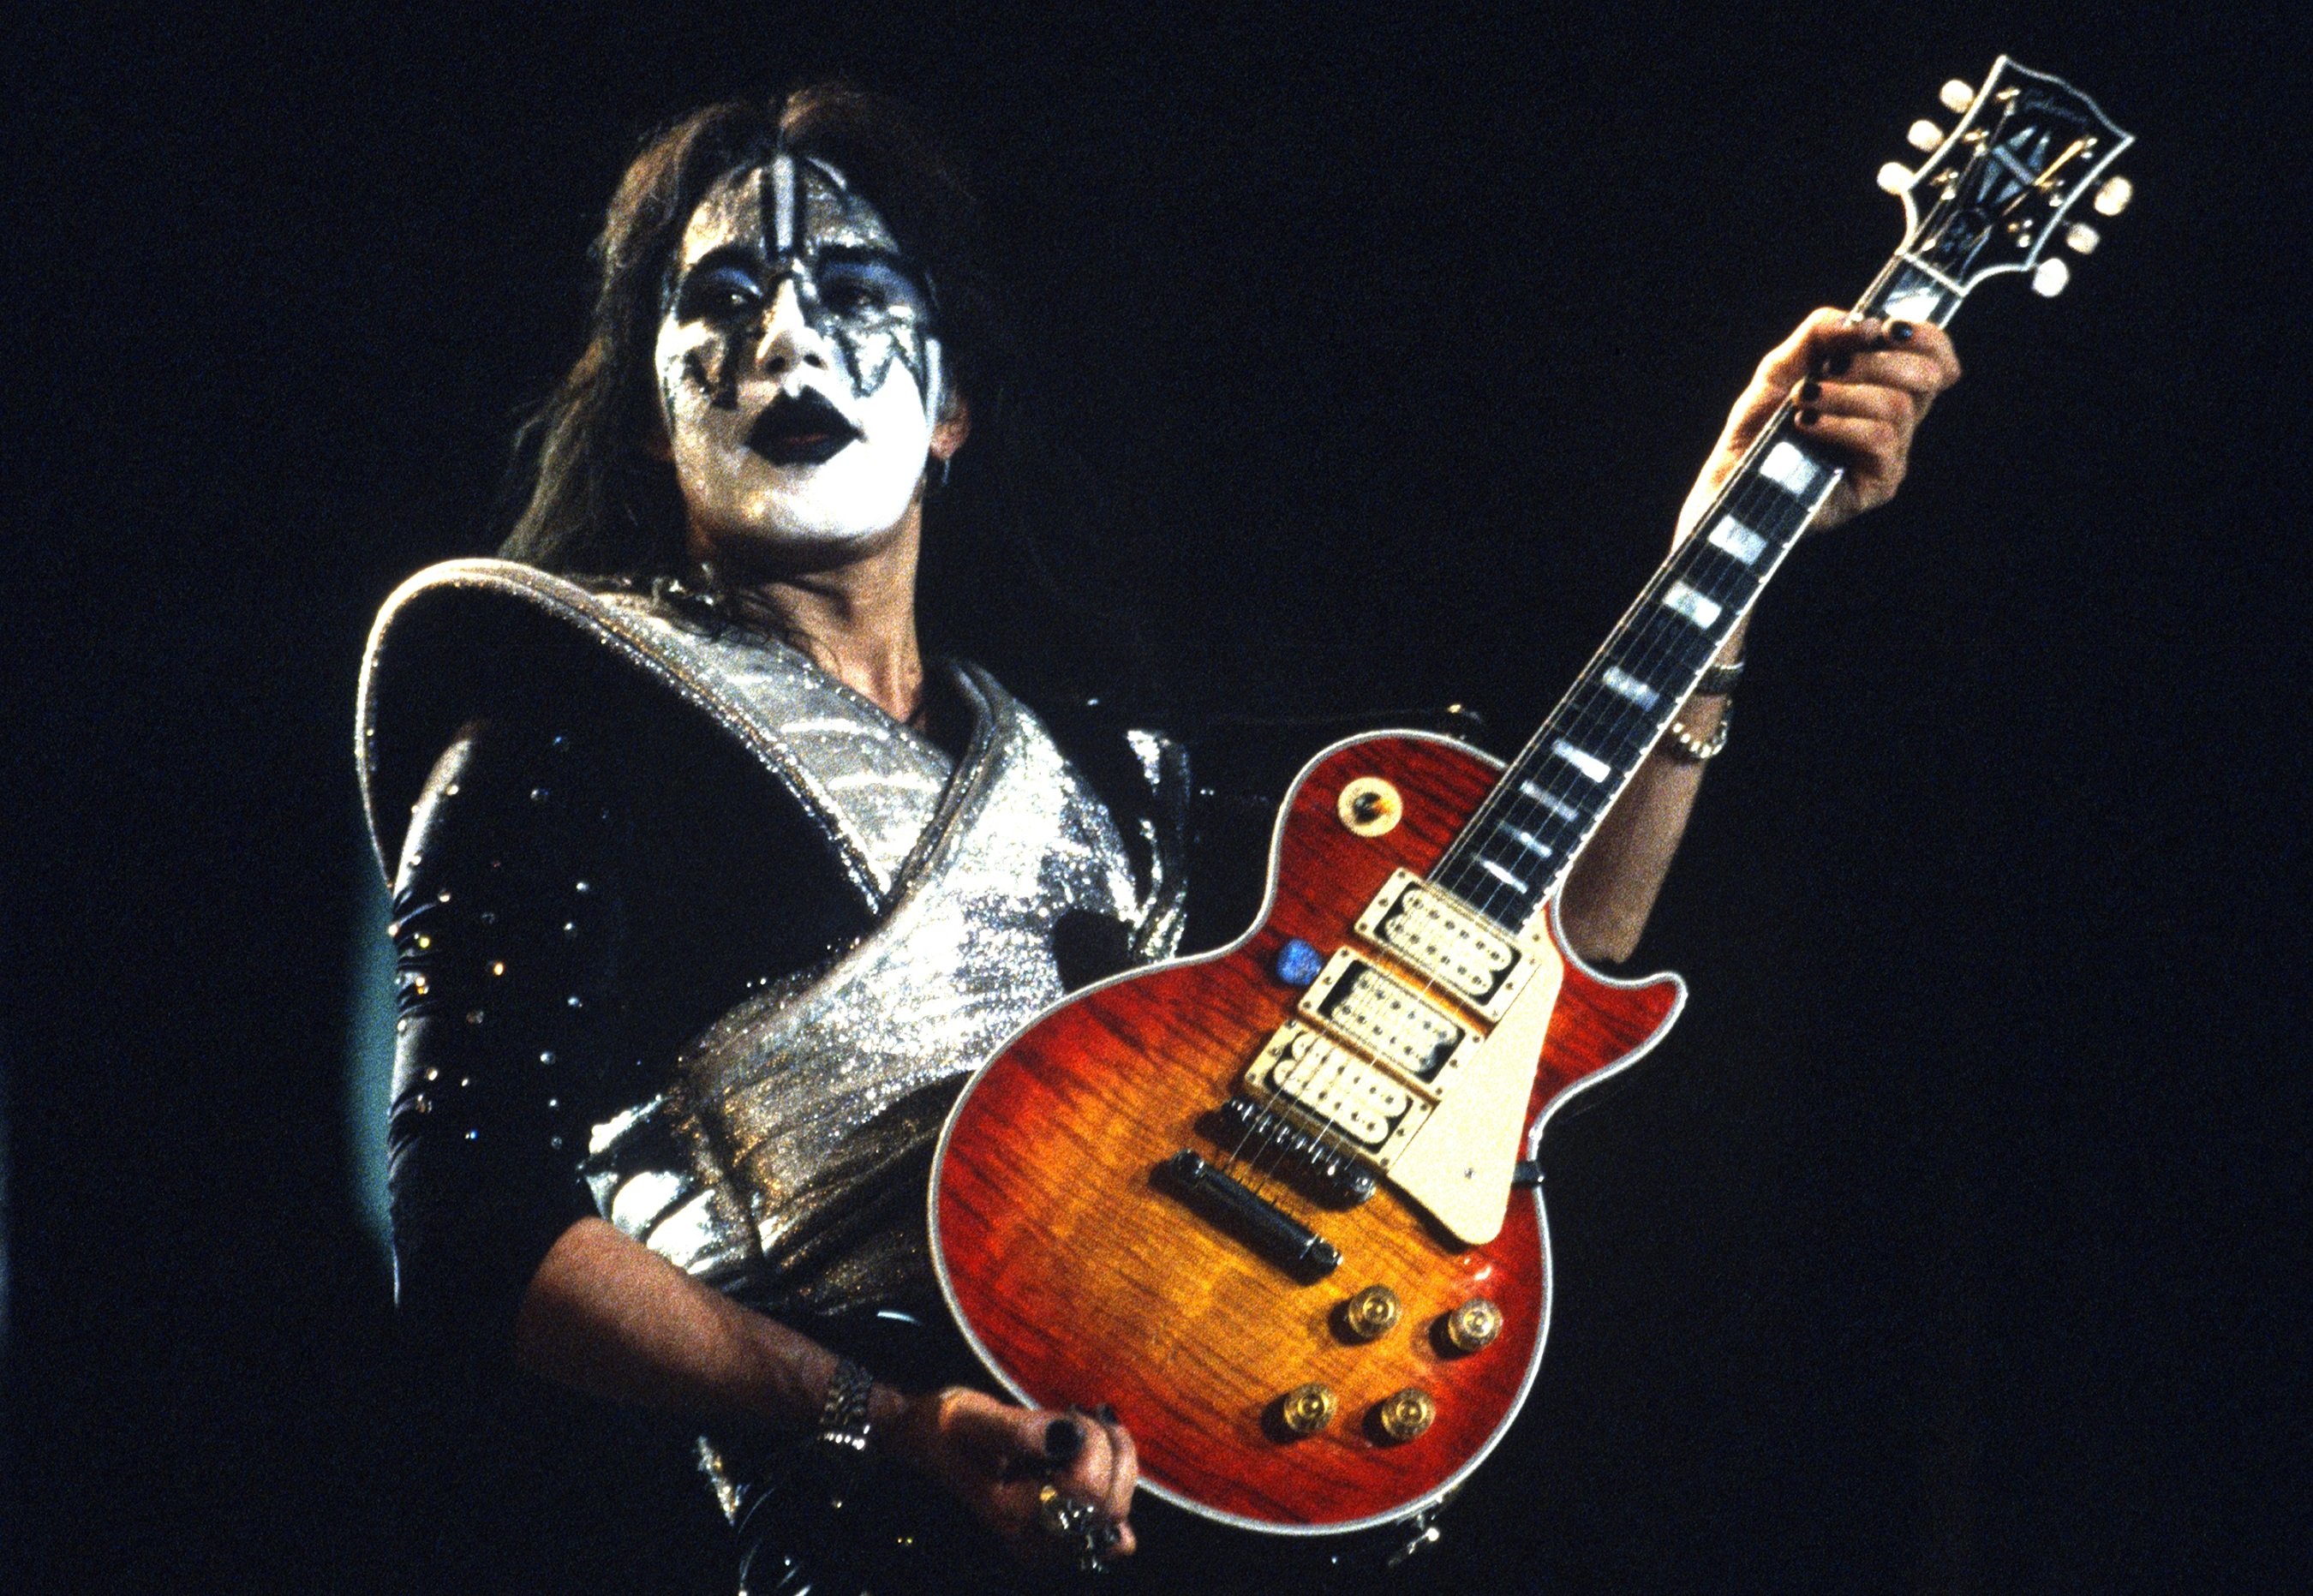 Ace Frehley of Kiss with a guitar